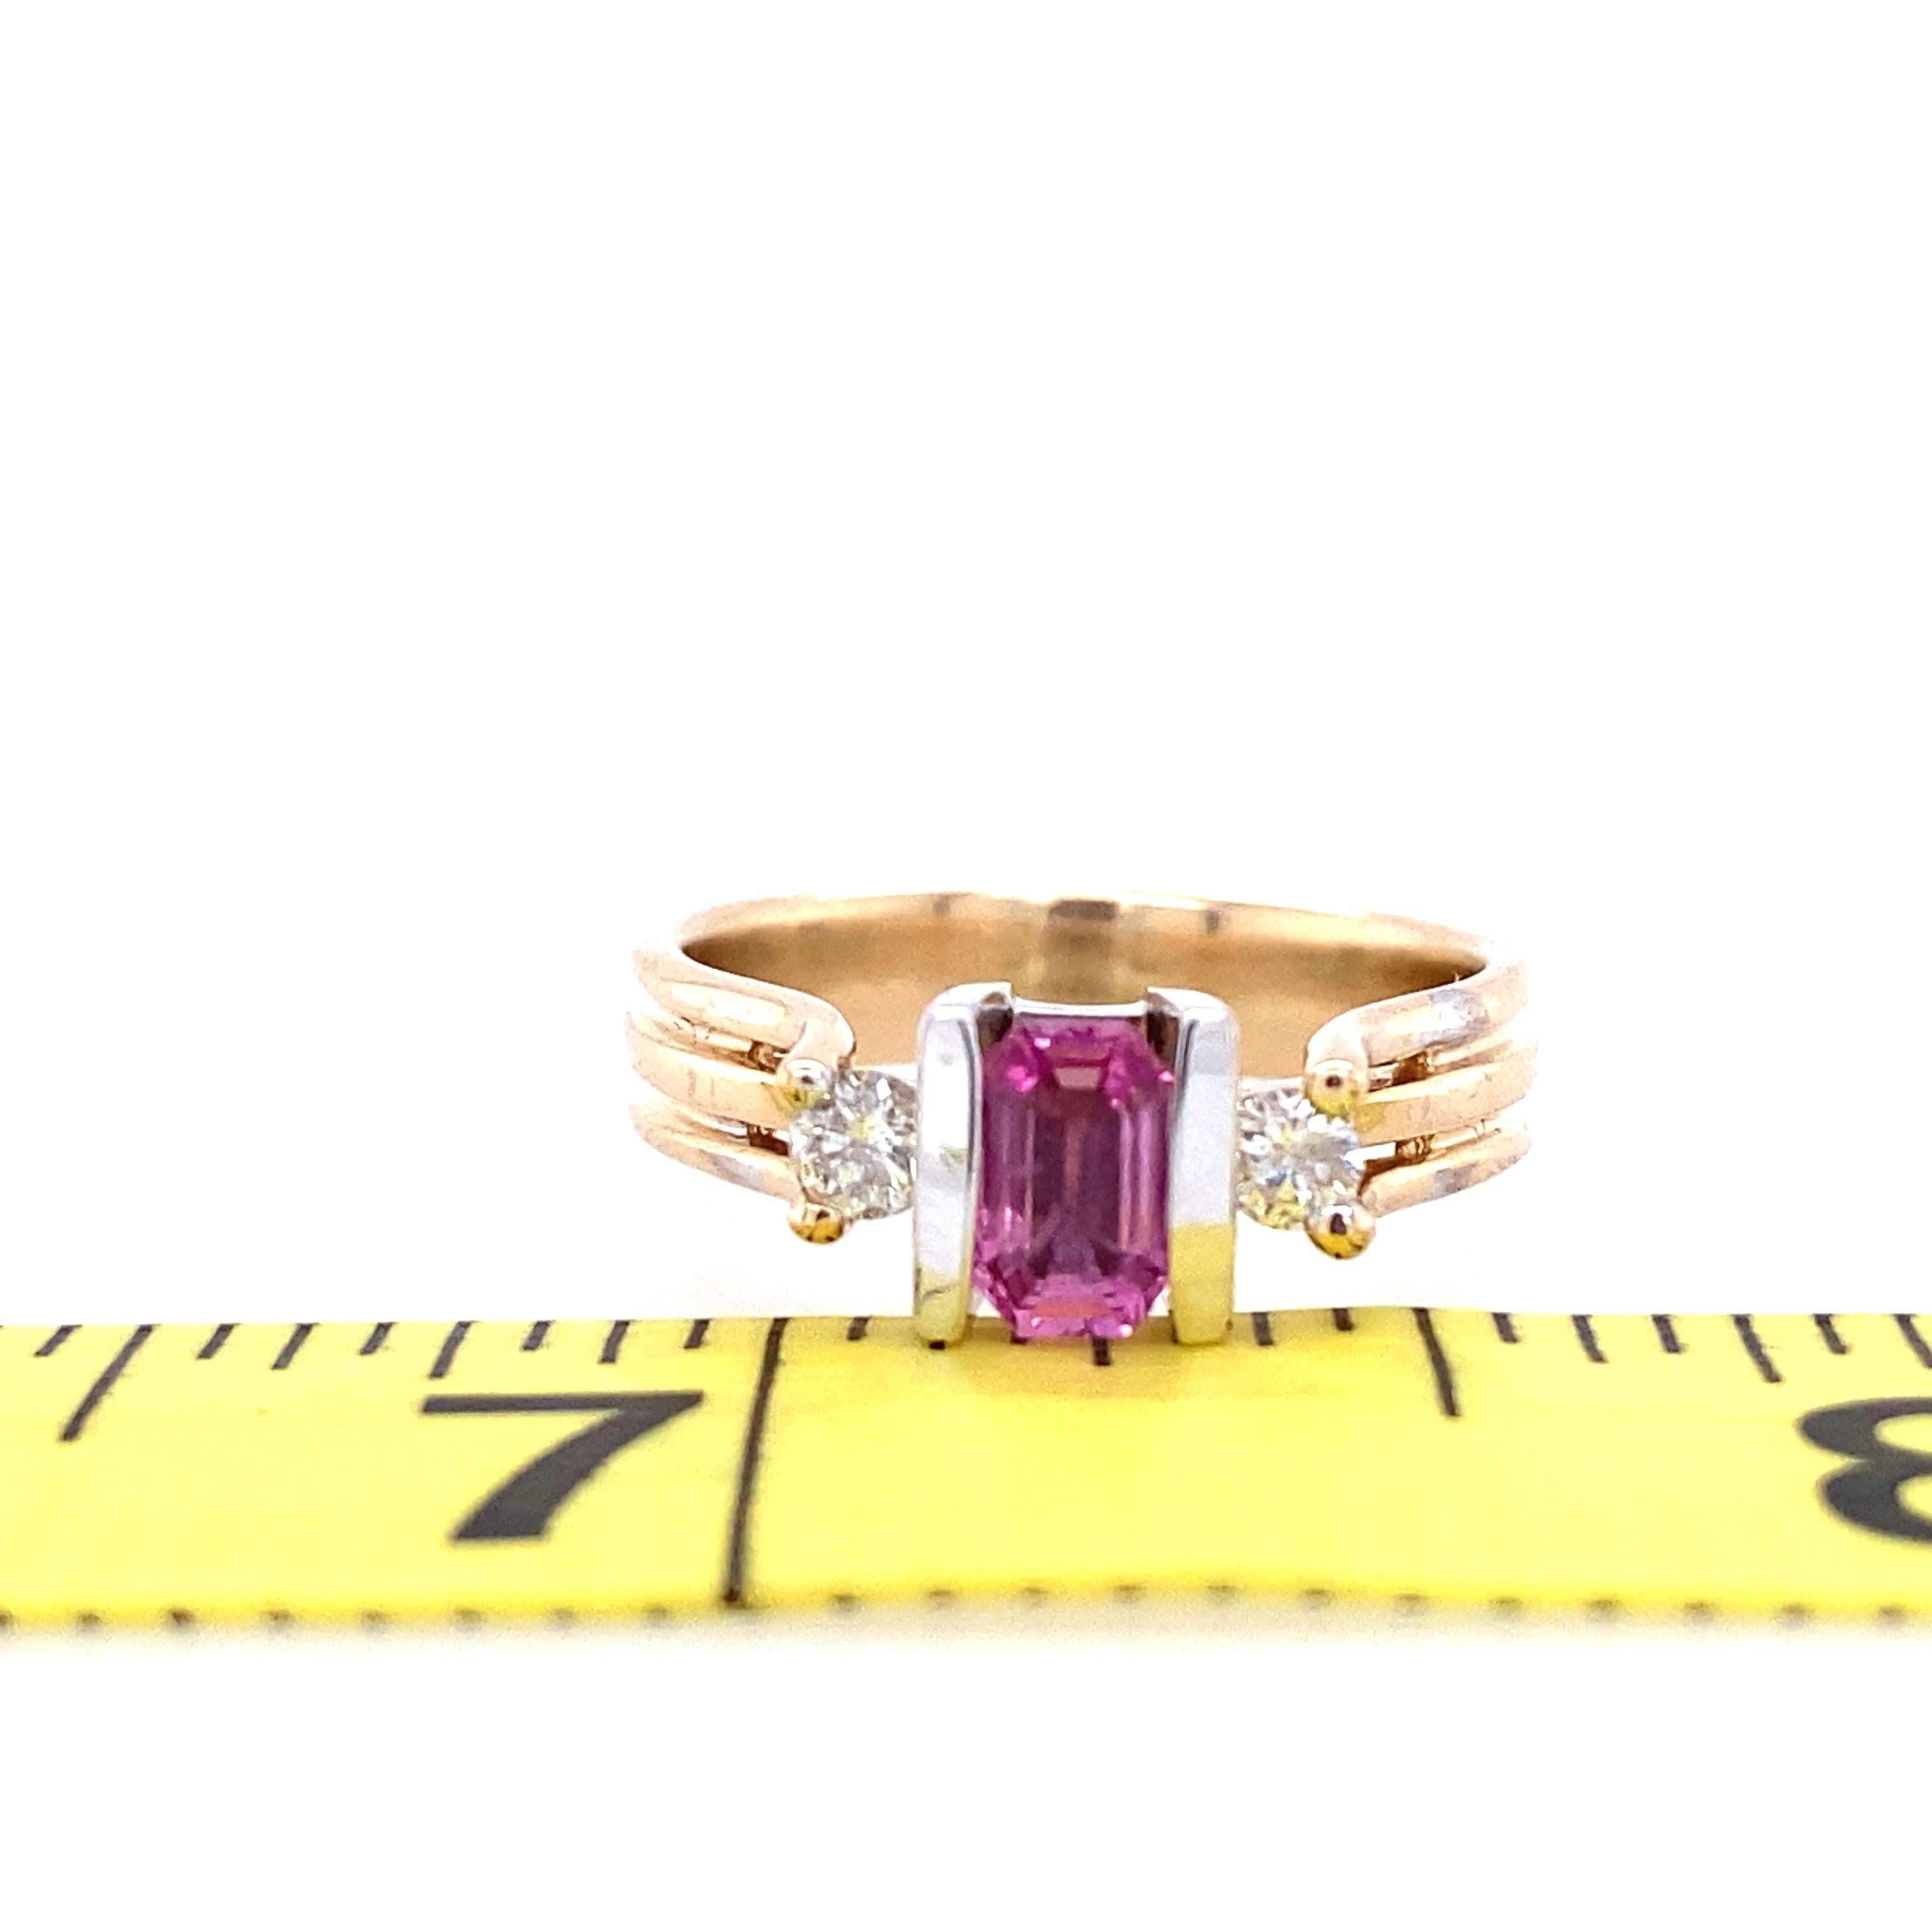 14K White and Yellow Gold Pink Sapphire and Diamond Ring 2